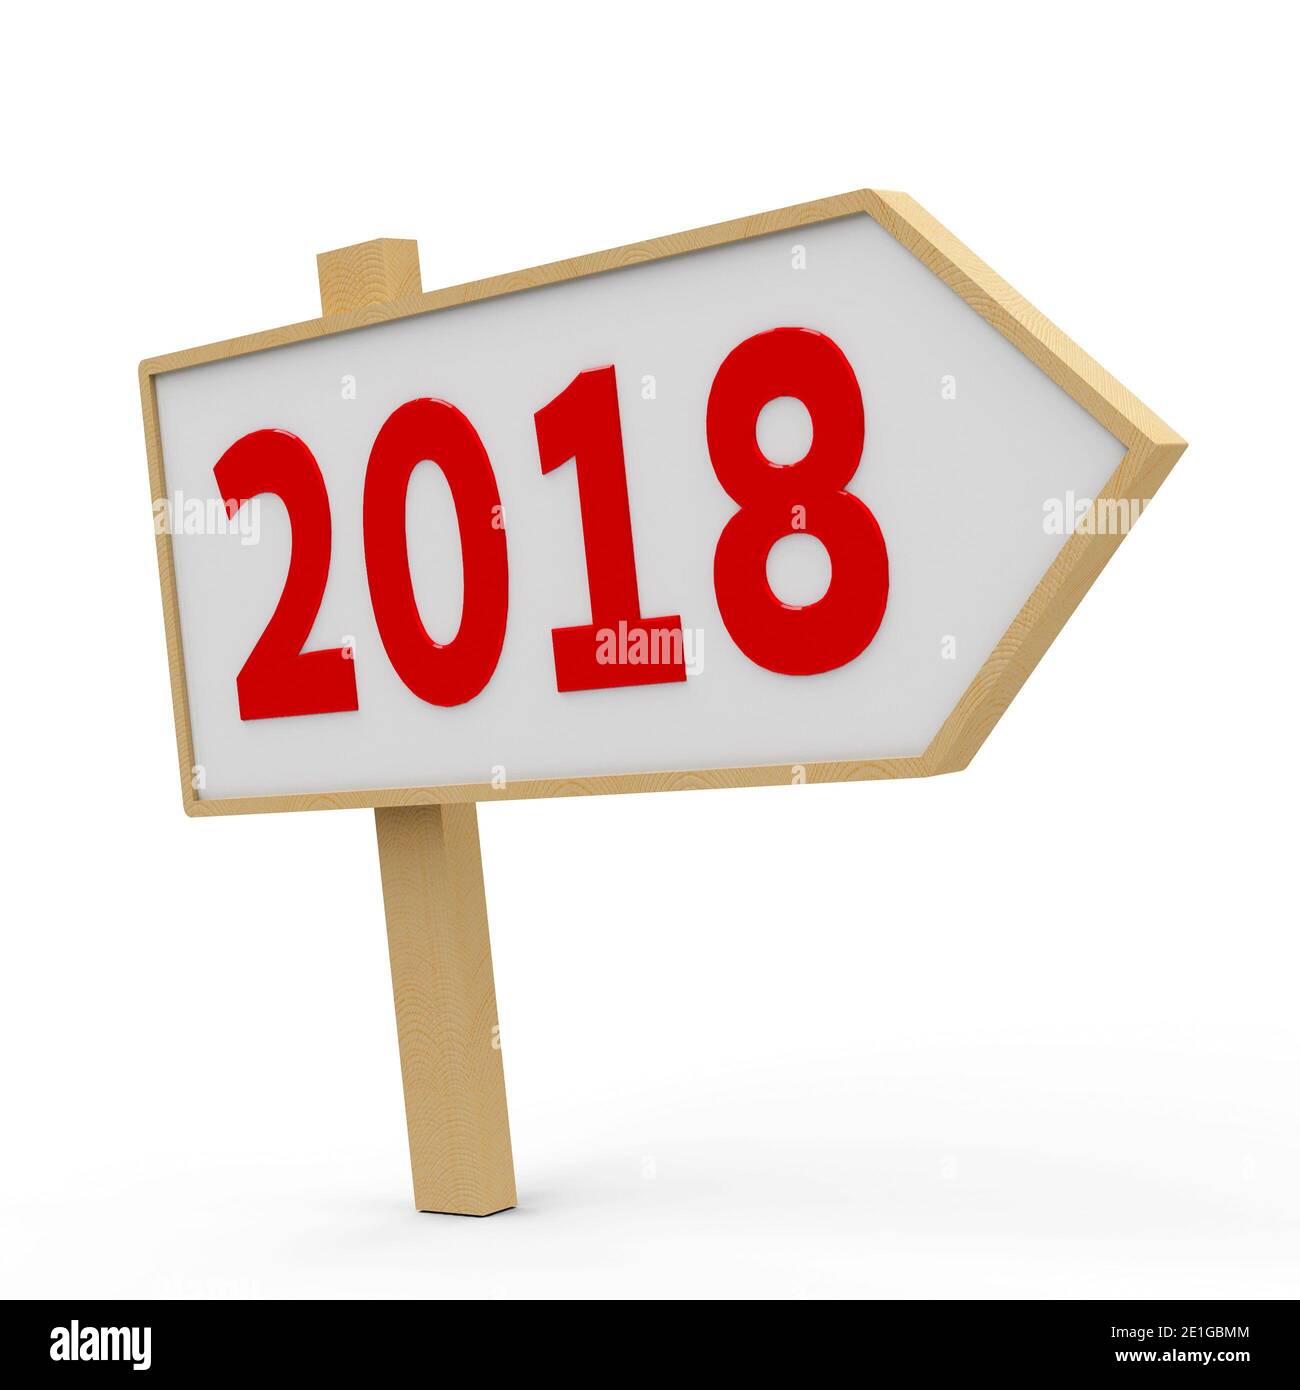 2018 white banner on white background, represents the new year 2018, three-dimensional rendering, 3D illustration Stock Photo